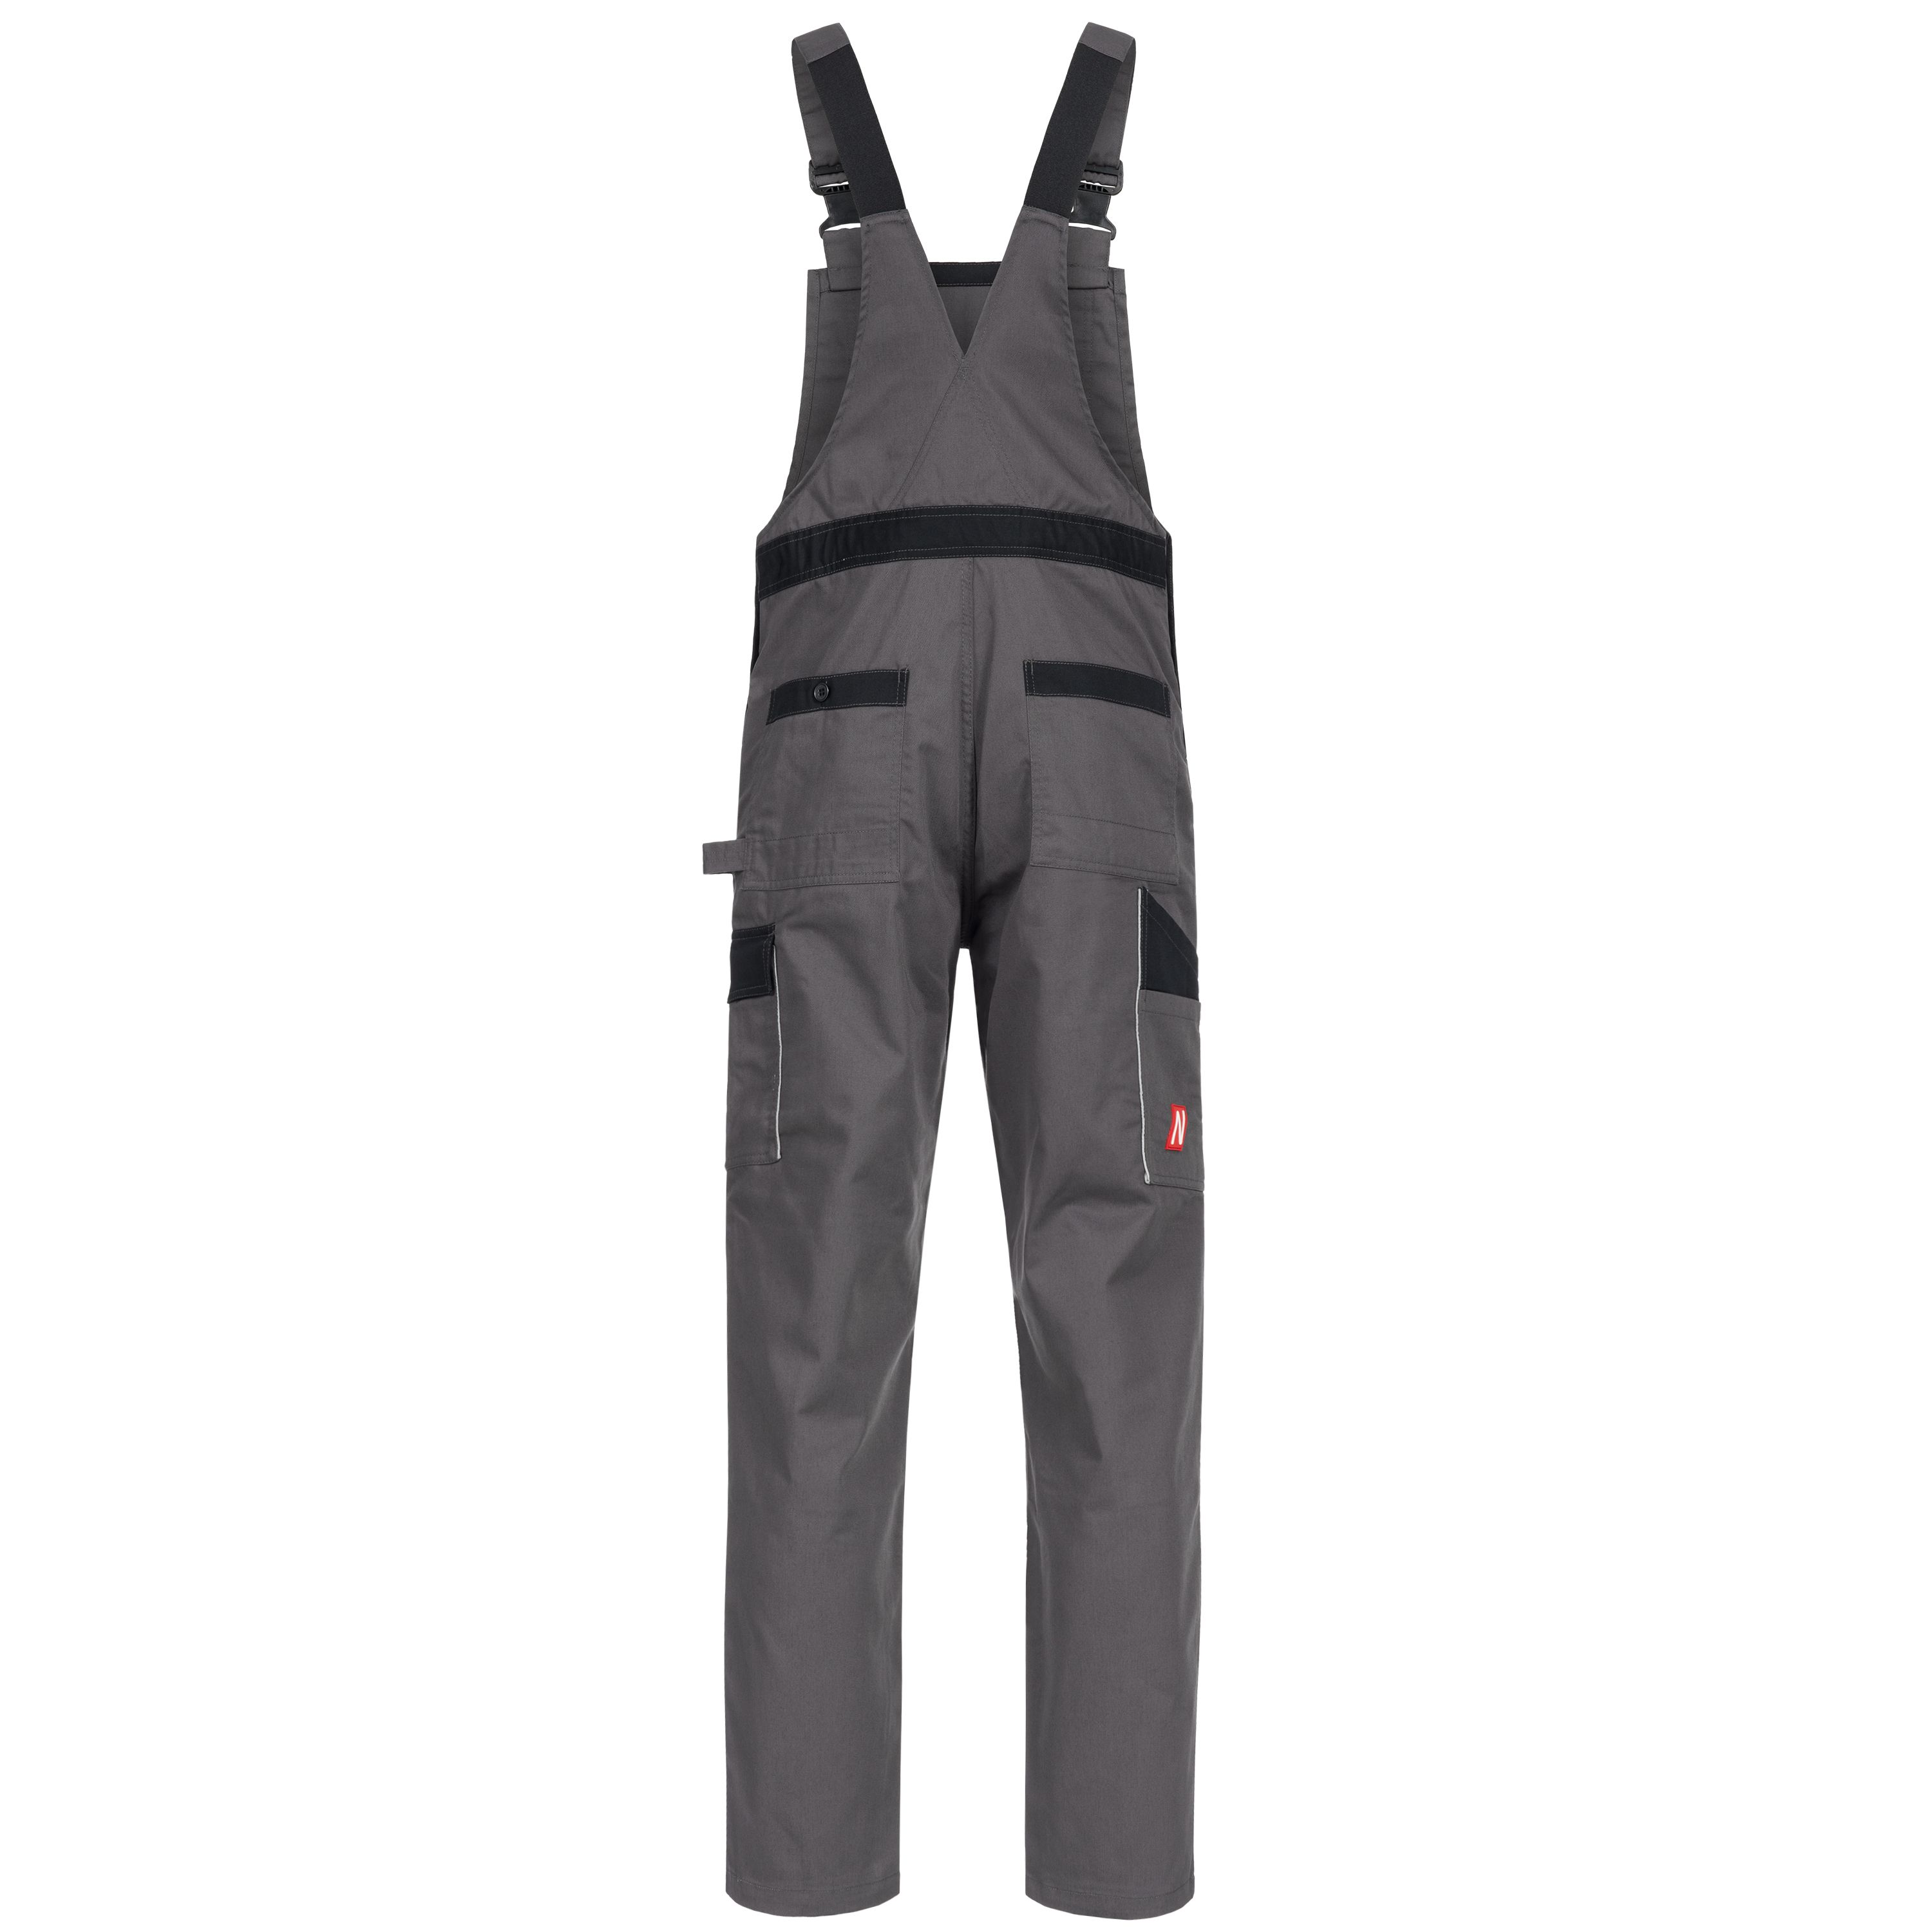 NITRAS MOTION TEX LIGHT 7522 Dungarees - Trousers with bib for work - 35% cotton - Grey - 68